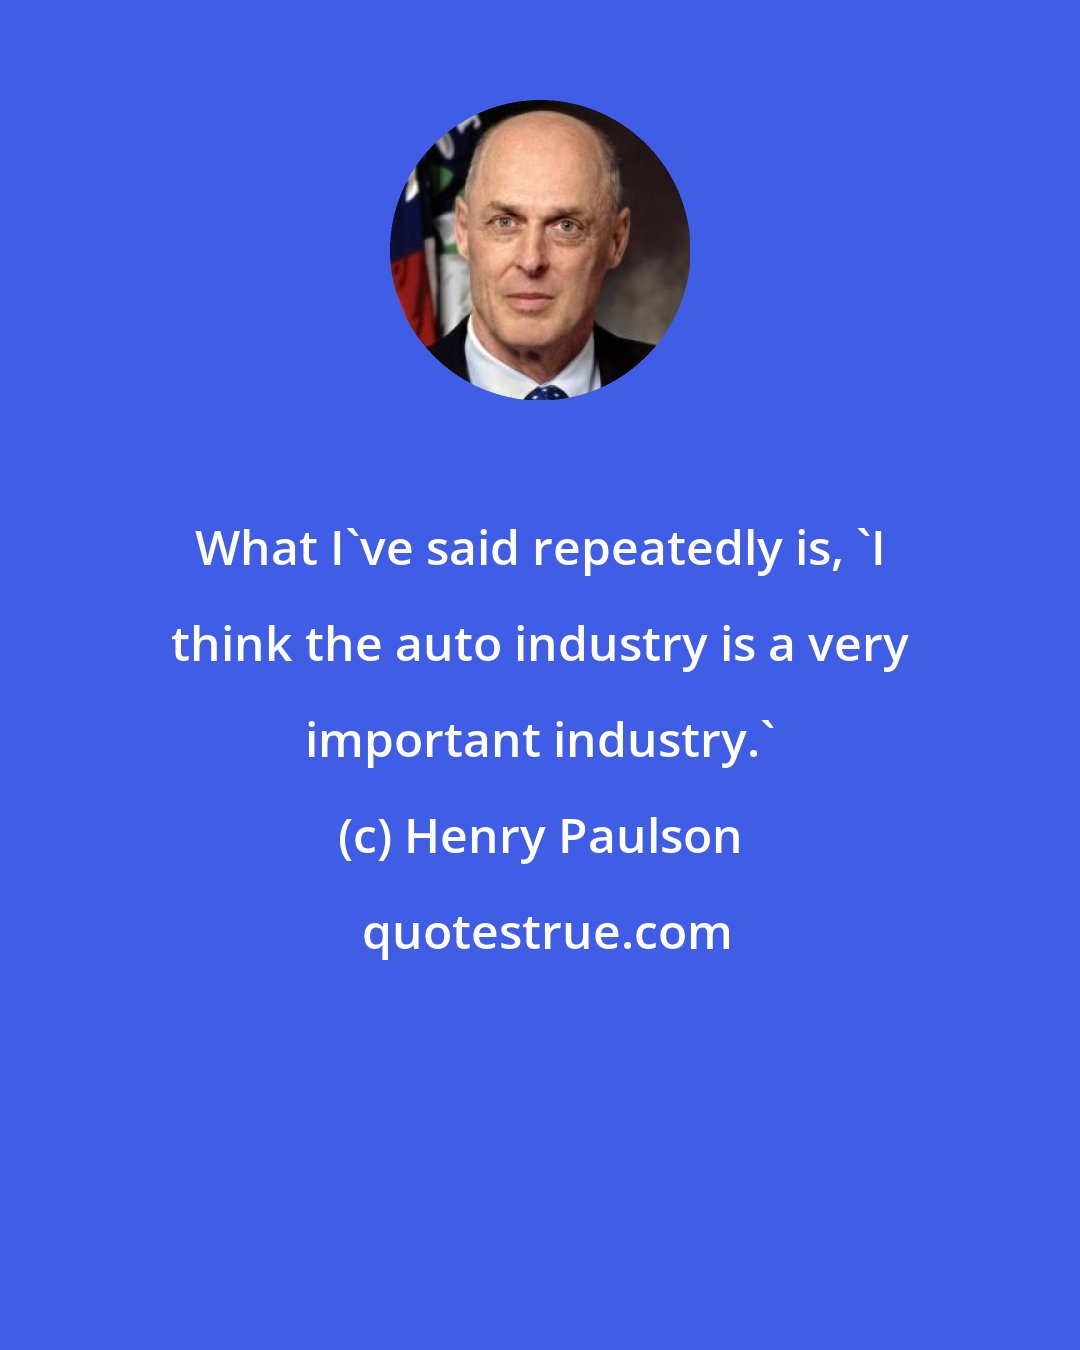 Henry Paulson: What I've said repeatedly is, 'I think the auto industry is a very important industry.'